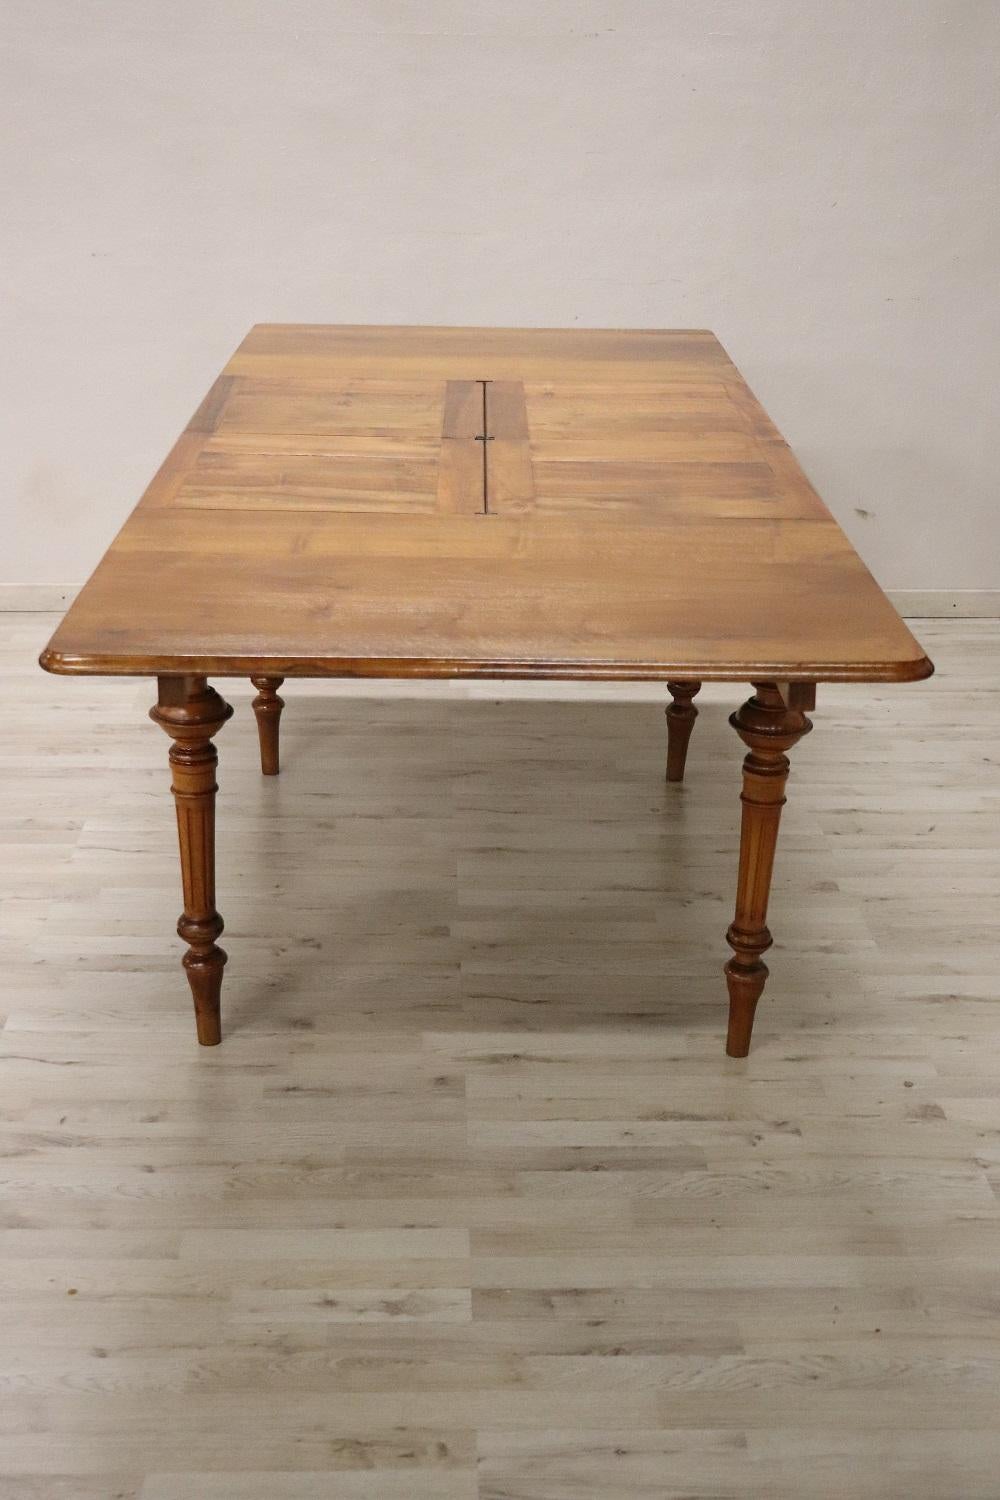 19th Century Italian Solid Walnut Extendable Antique Dining Room Table 4